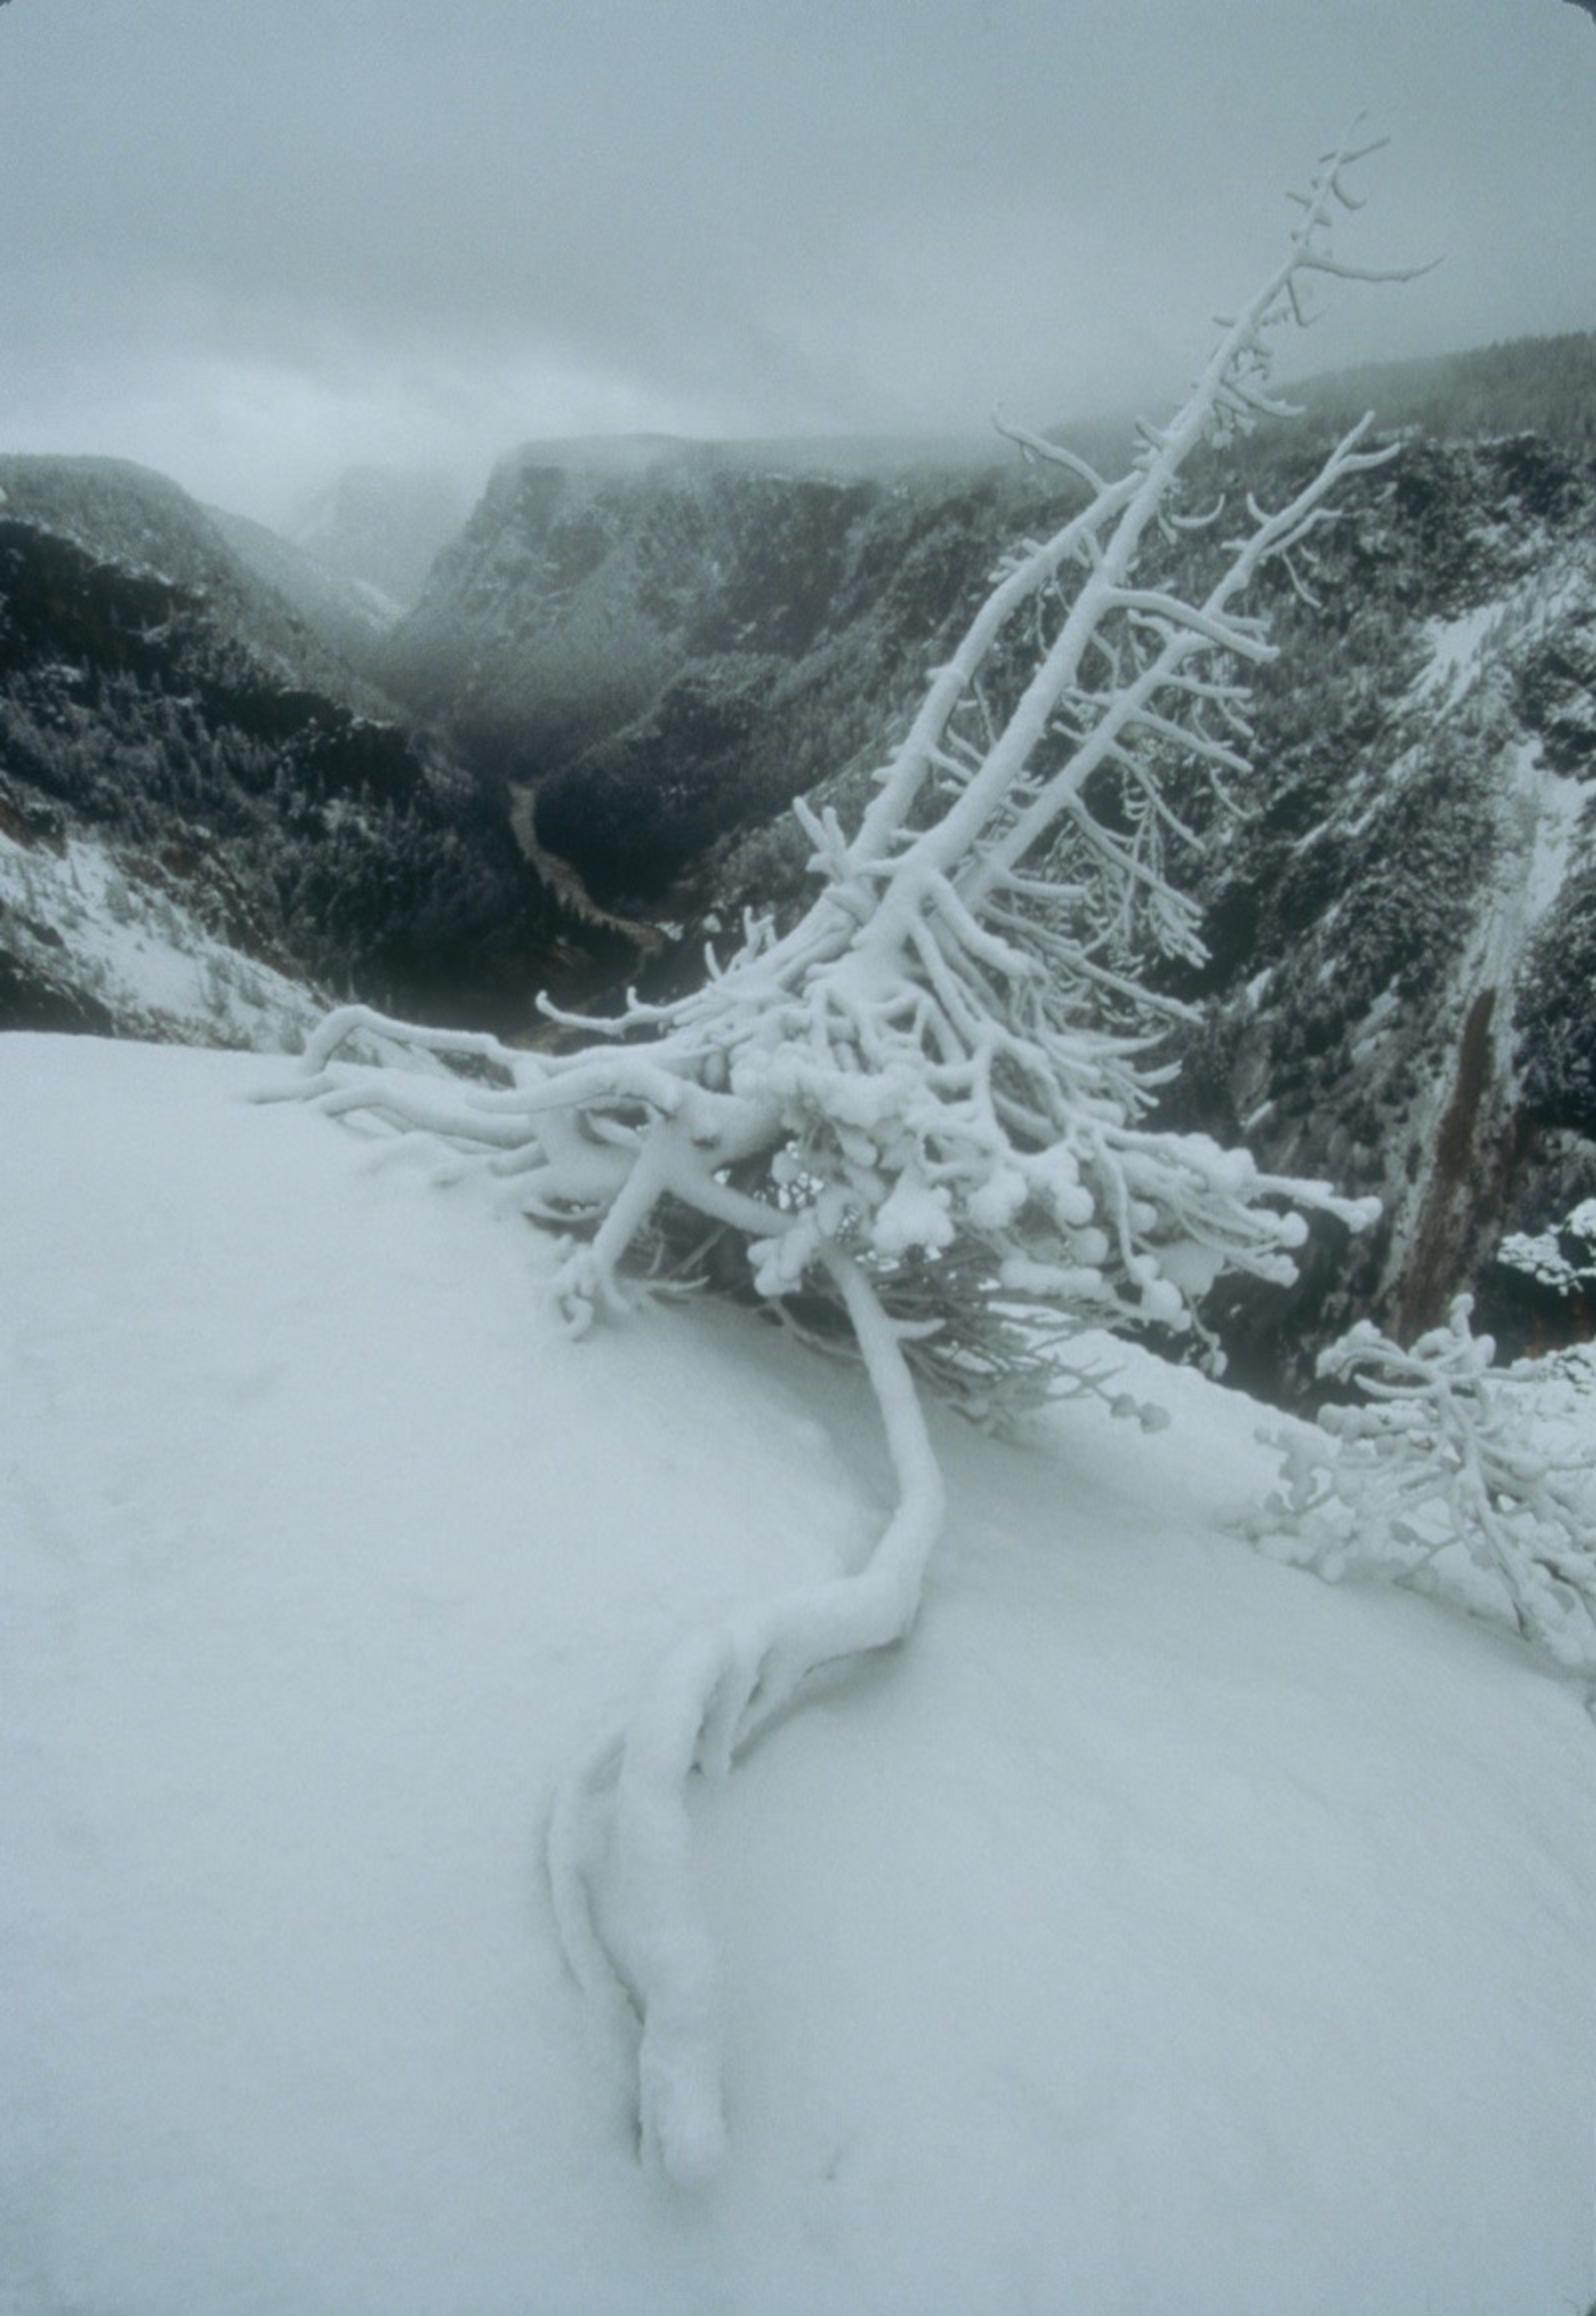 &quot;A winter snowstorm embellishes this old pine snag that has extended a formidable root in an attempt to belay the itself from being drawn into the maw of the canyon,&quot; Fuller notes. &quot;Think of clawing your fingernails in slow motion into the top edge of a cliff with a 1,200-foot exposure. Eventually the pull of gravity over-whelmes the life force in all of us.&quot; Photo by Steven Fuller